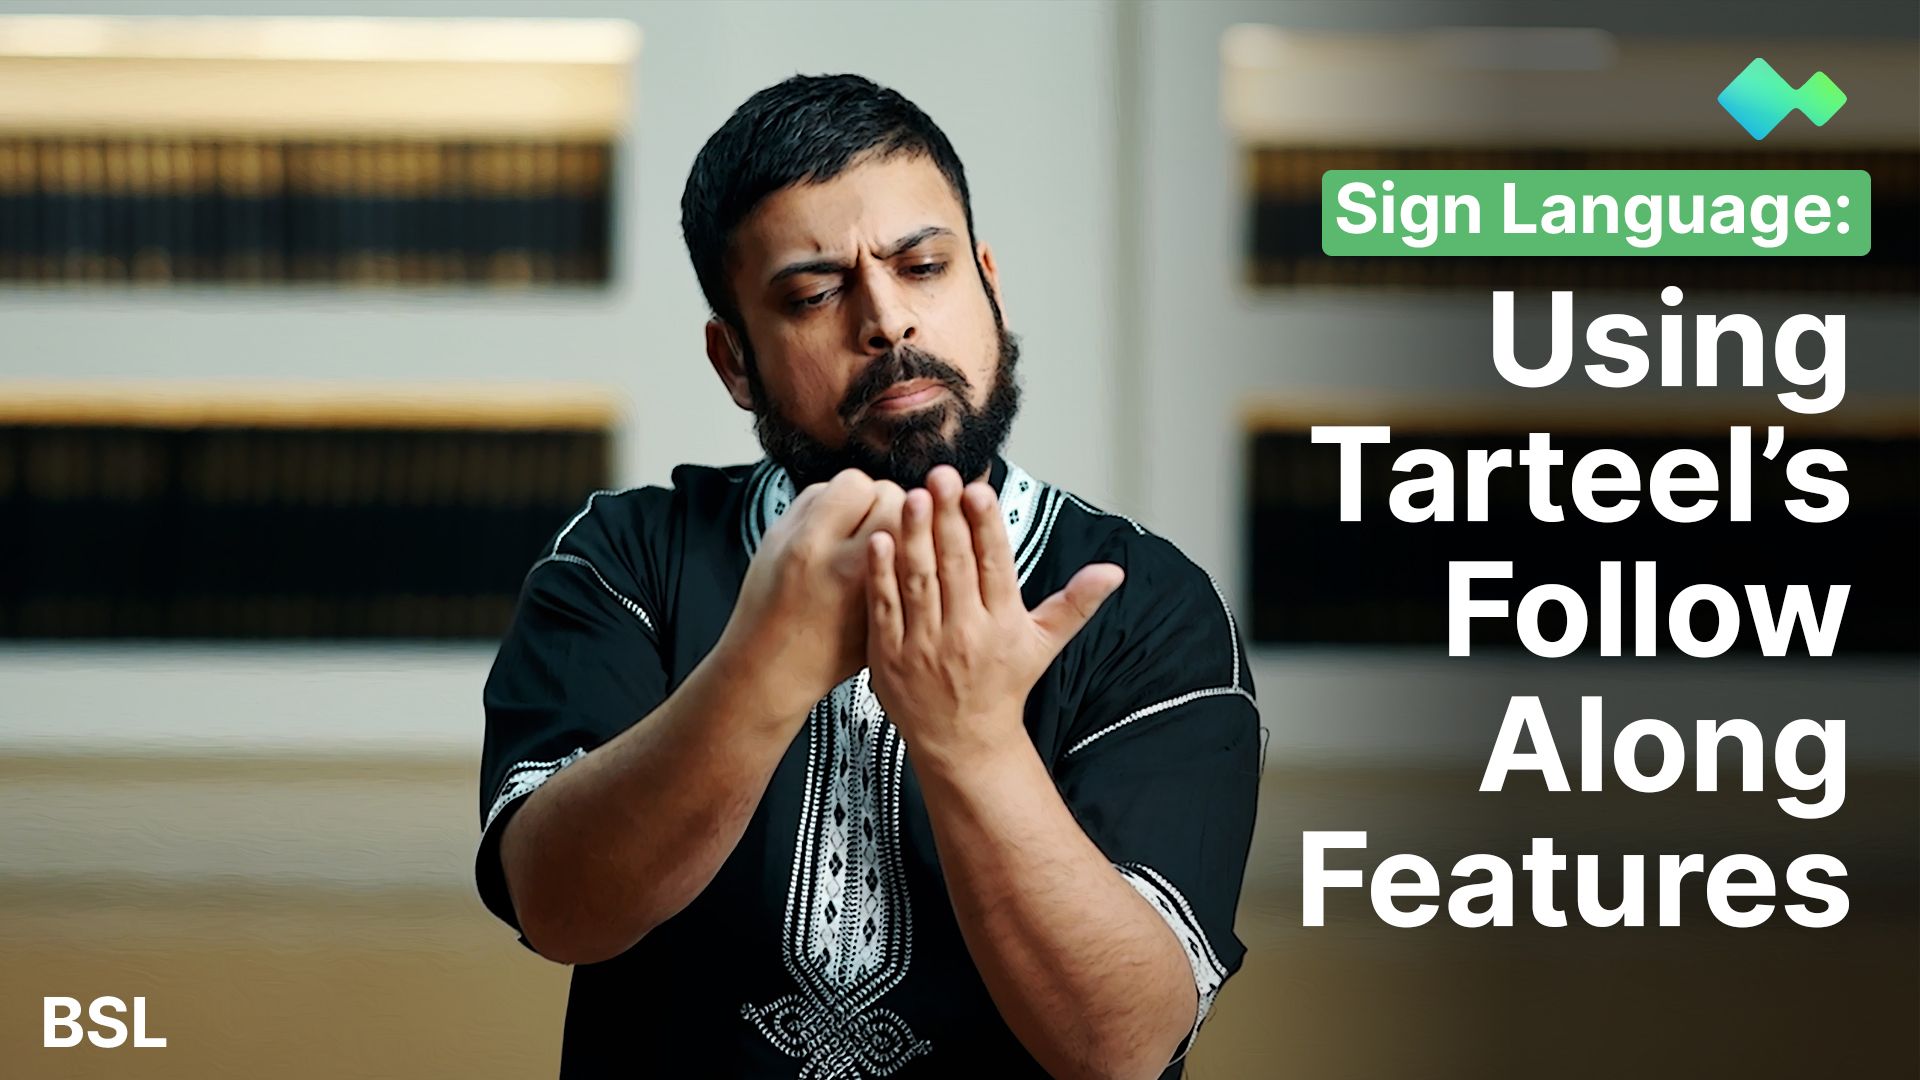 An image of a man using British Sign Language. The text reads: Sign Language: Using Tarteel's Follow Along Features